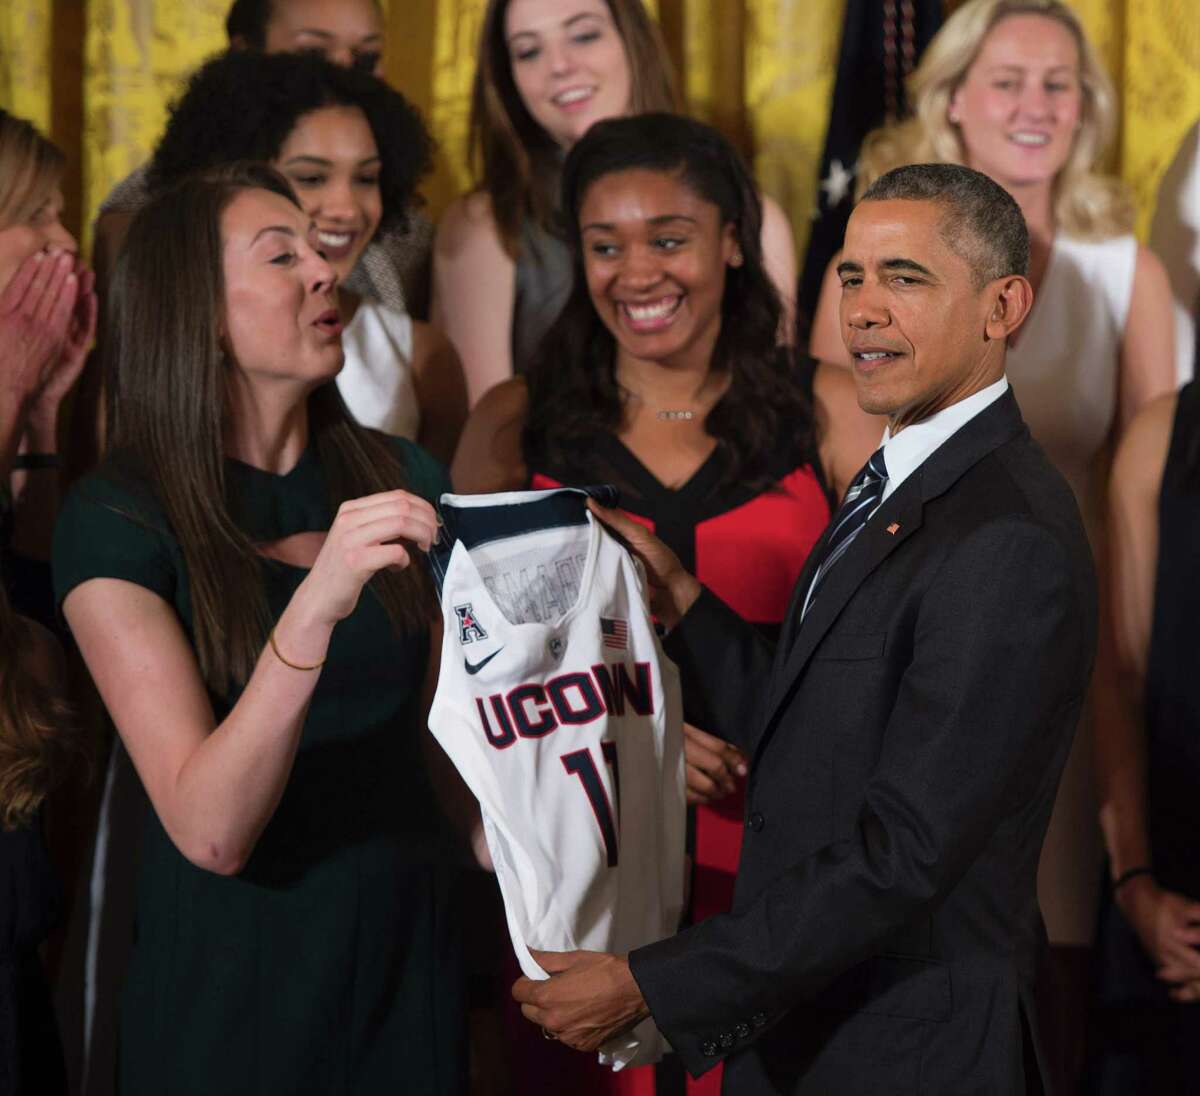 US President Barack Obama holds a women's jersey as he poses with player Breanna Stewart at the White House in Washington, DC, May 10, 2016, during an event welcoming the 2016 NCAA Champion UConn Huskies women's basketball team.